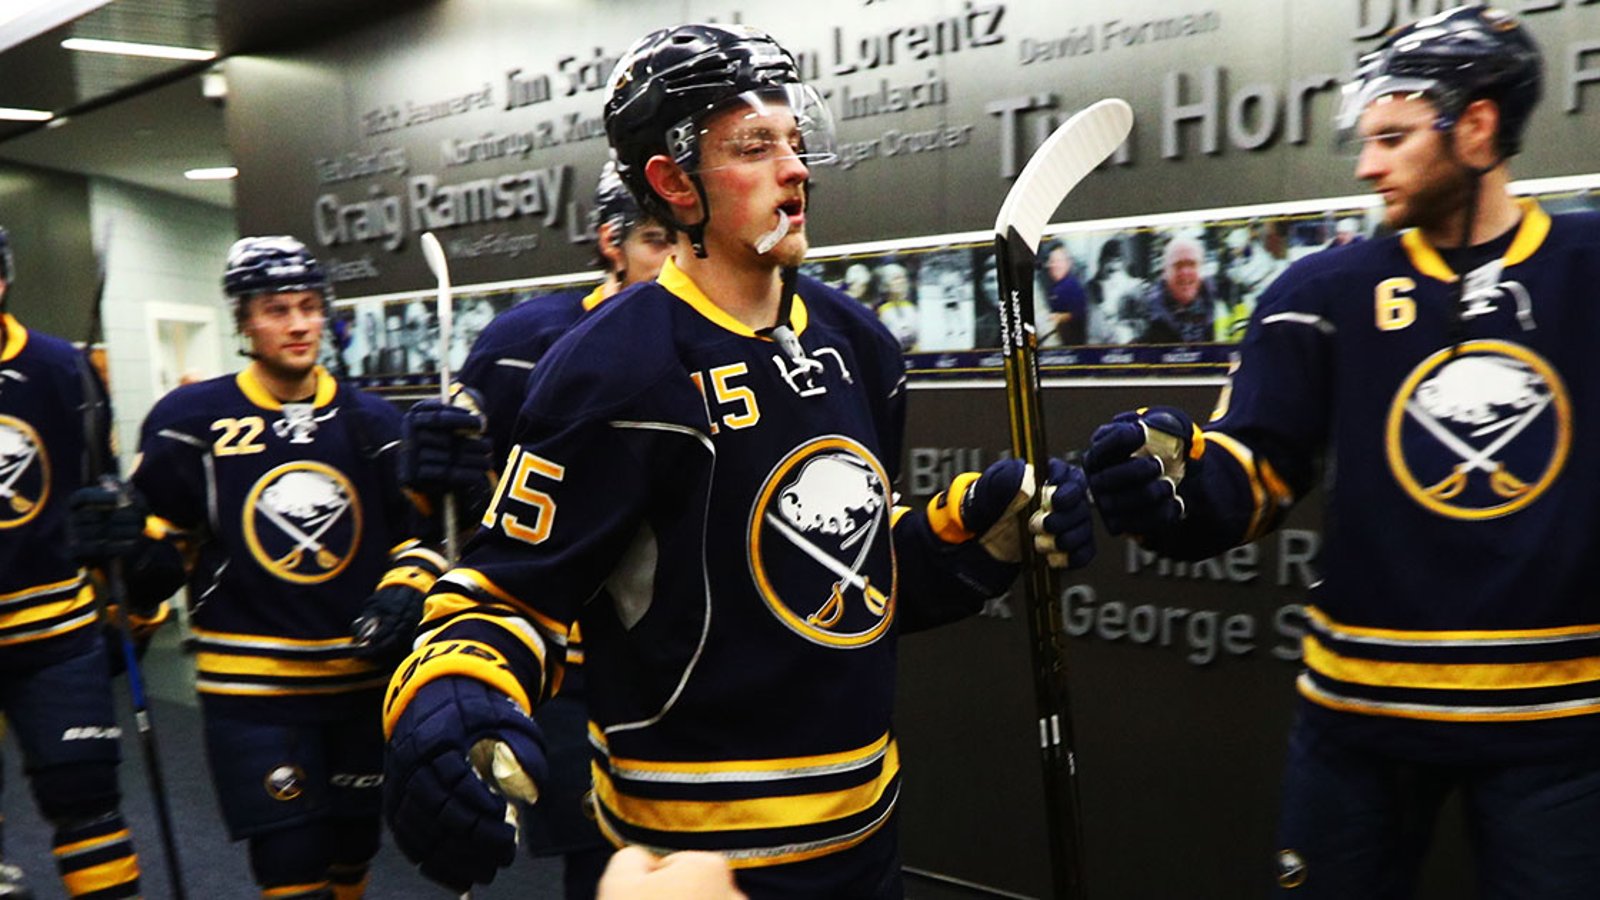 Jack Eichel's reaction to team loss is amazing.